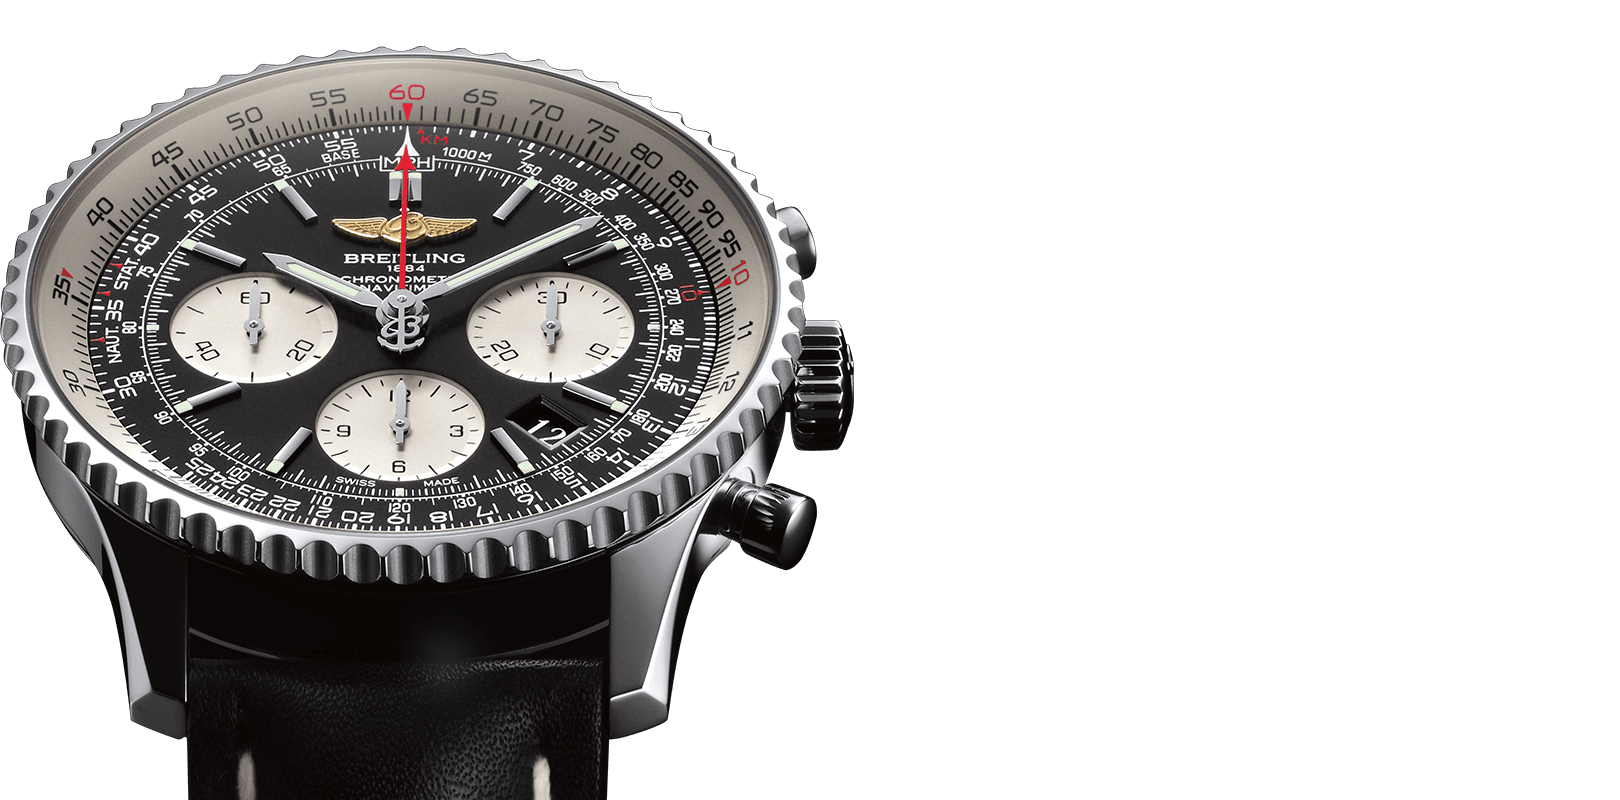 Breitling Pilot 8 Timer Curtis Warhawk 43 mmbreitling Pilot 8 Timer Curtis Warhawk Arab Dial Middle East Limited Edition 100 pieces